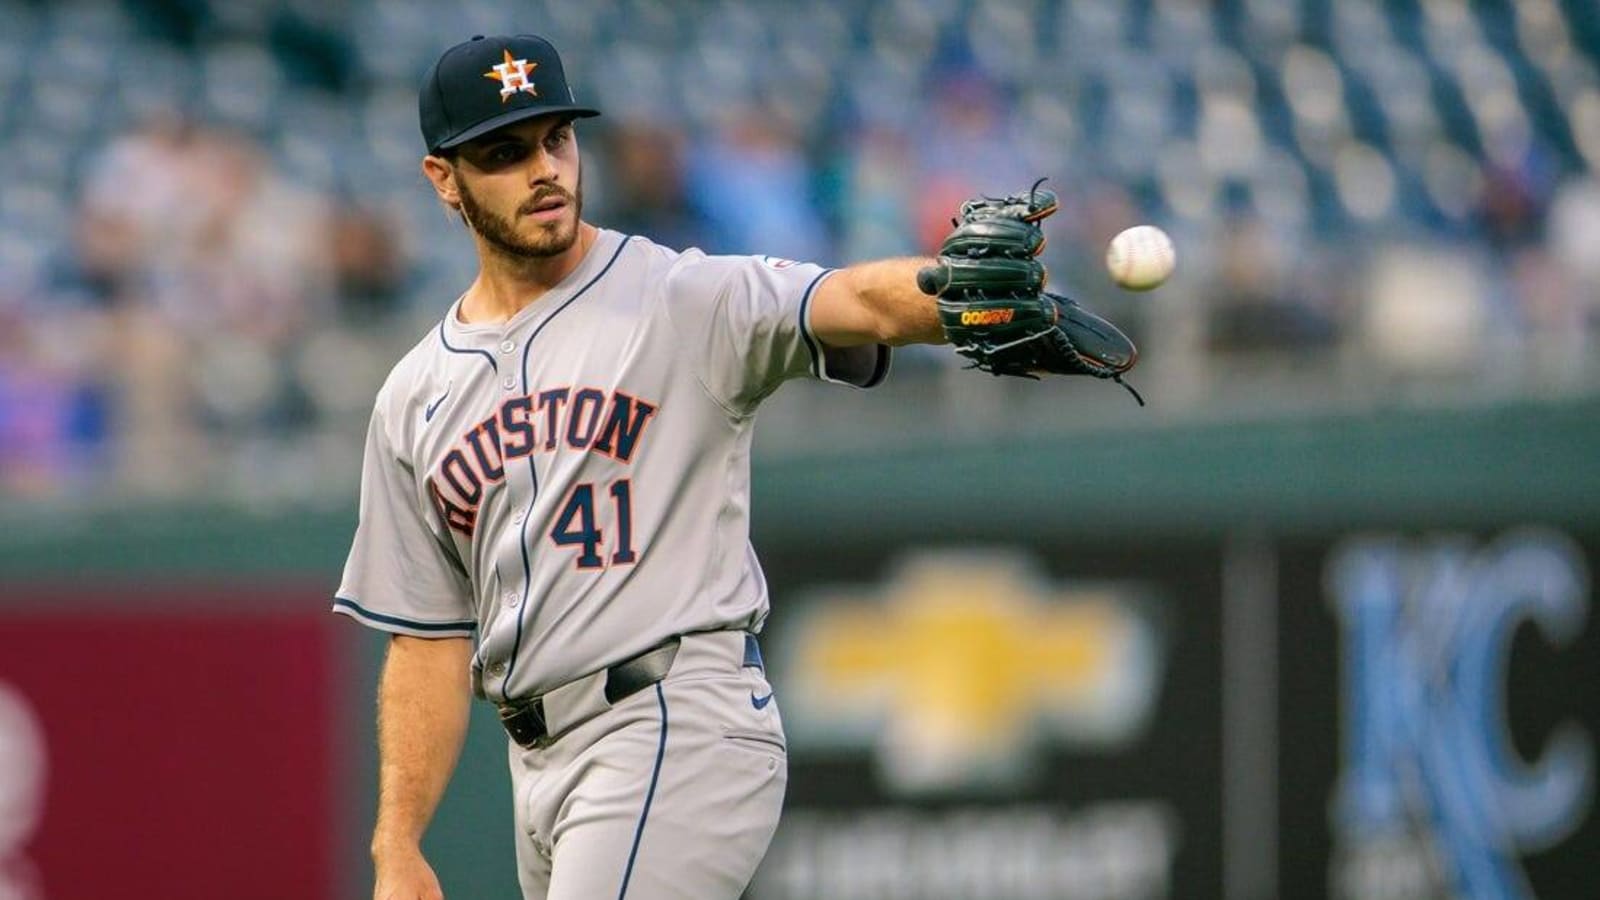 Astros, Braves begin series with young starters on mound